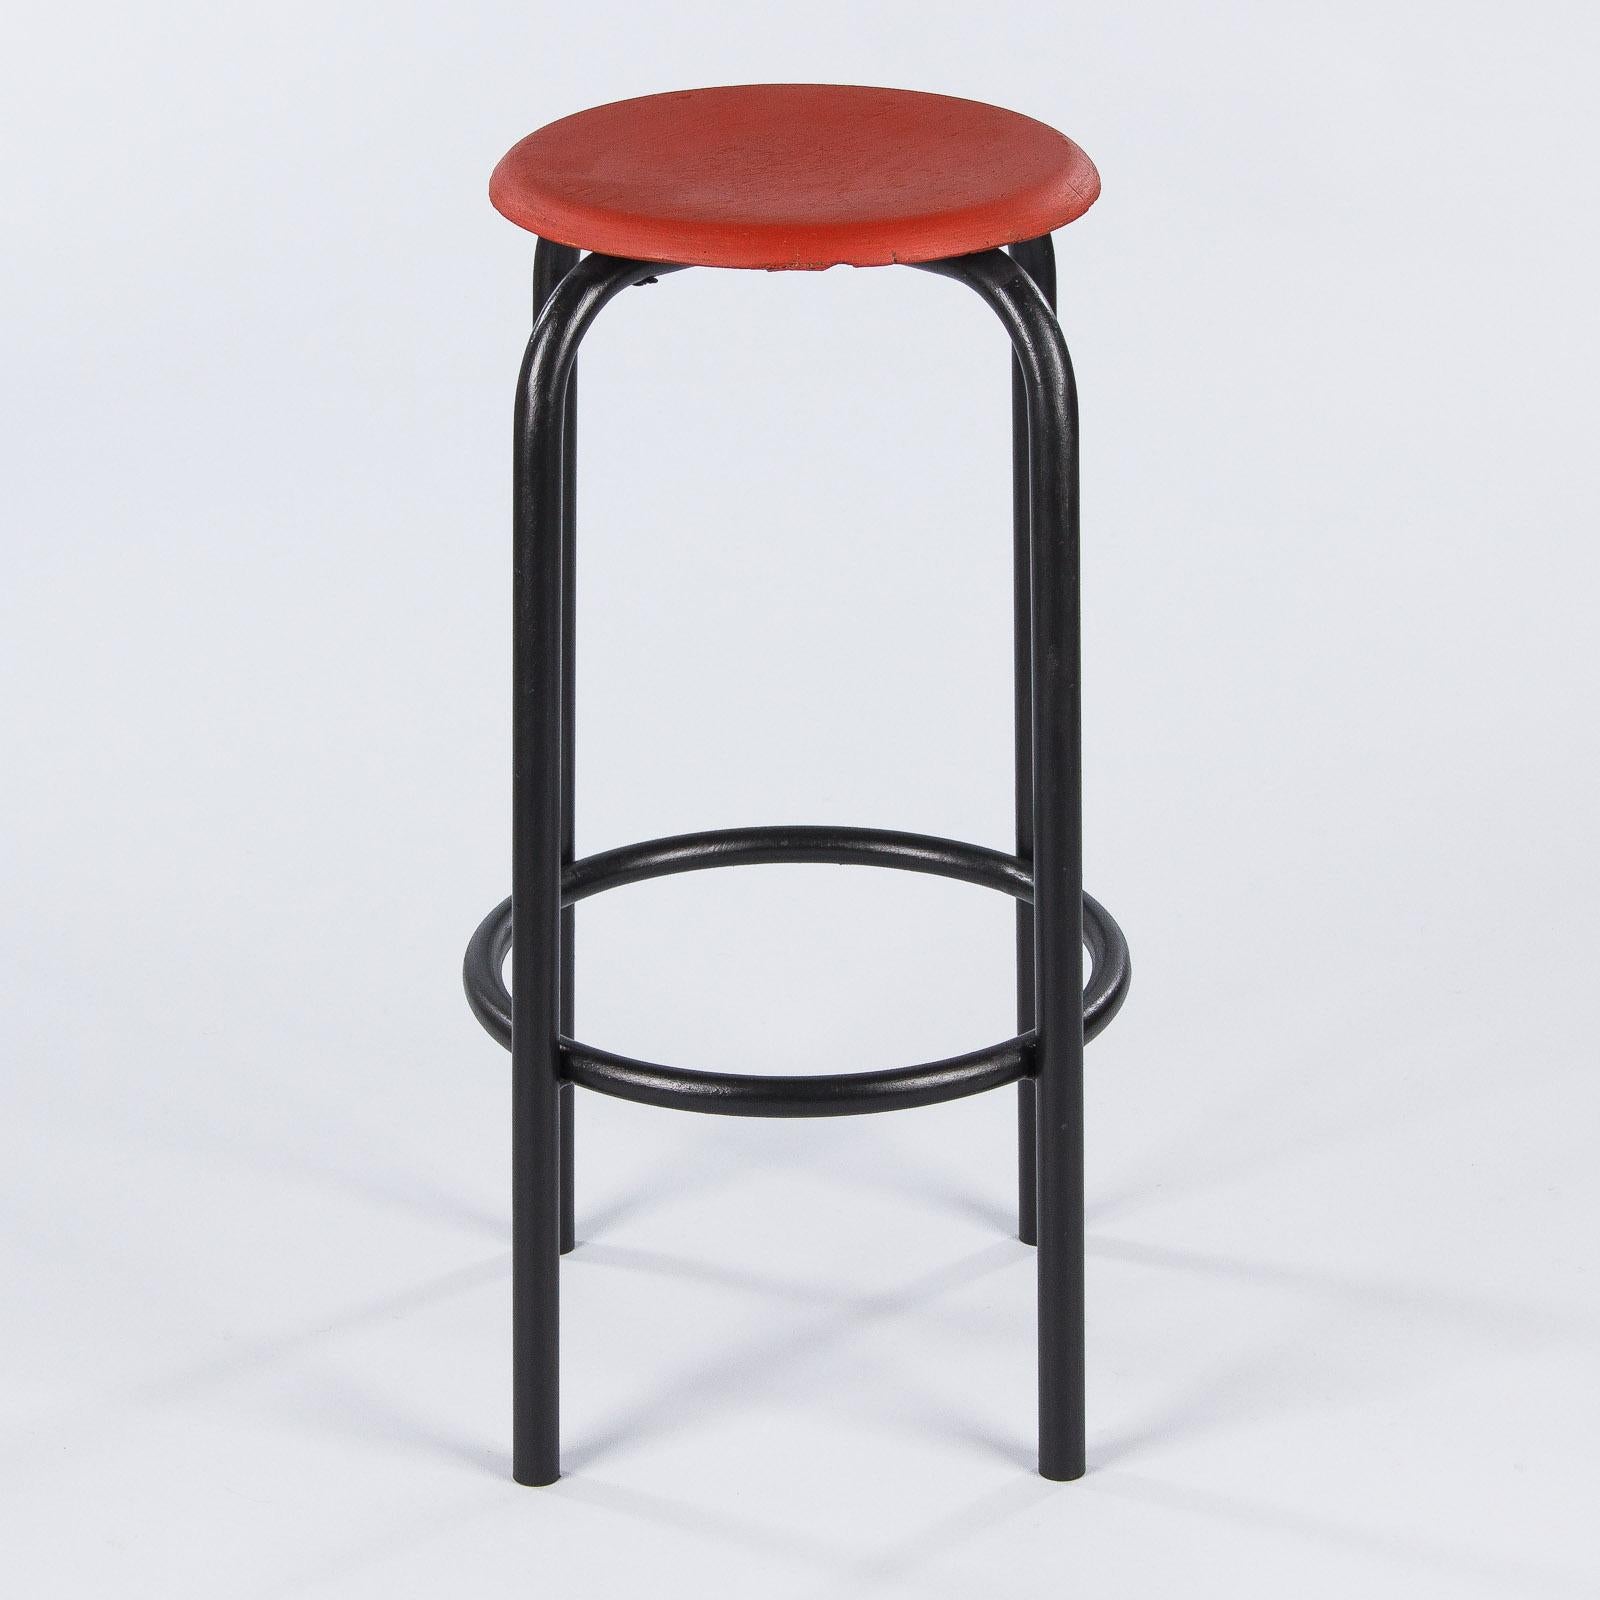 French Vintage Industrial Red and Black Stool, 1950s 5